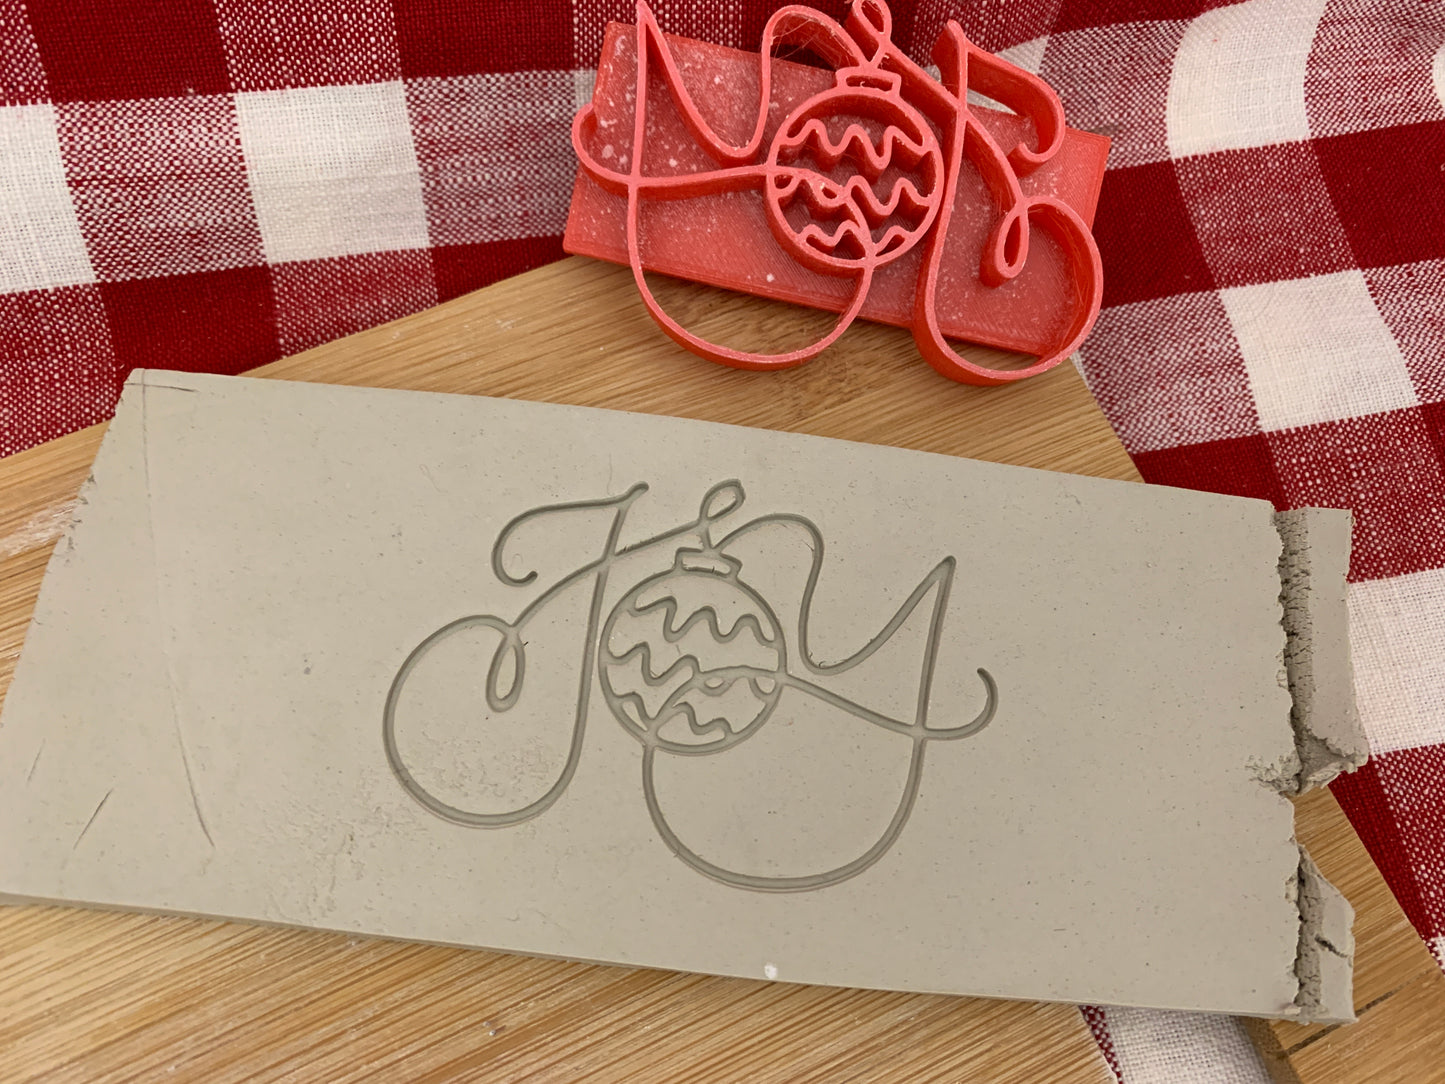 Christmas casual "Joy" word stamp - plastic 3D printed, multiple sizes